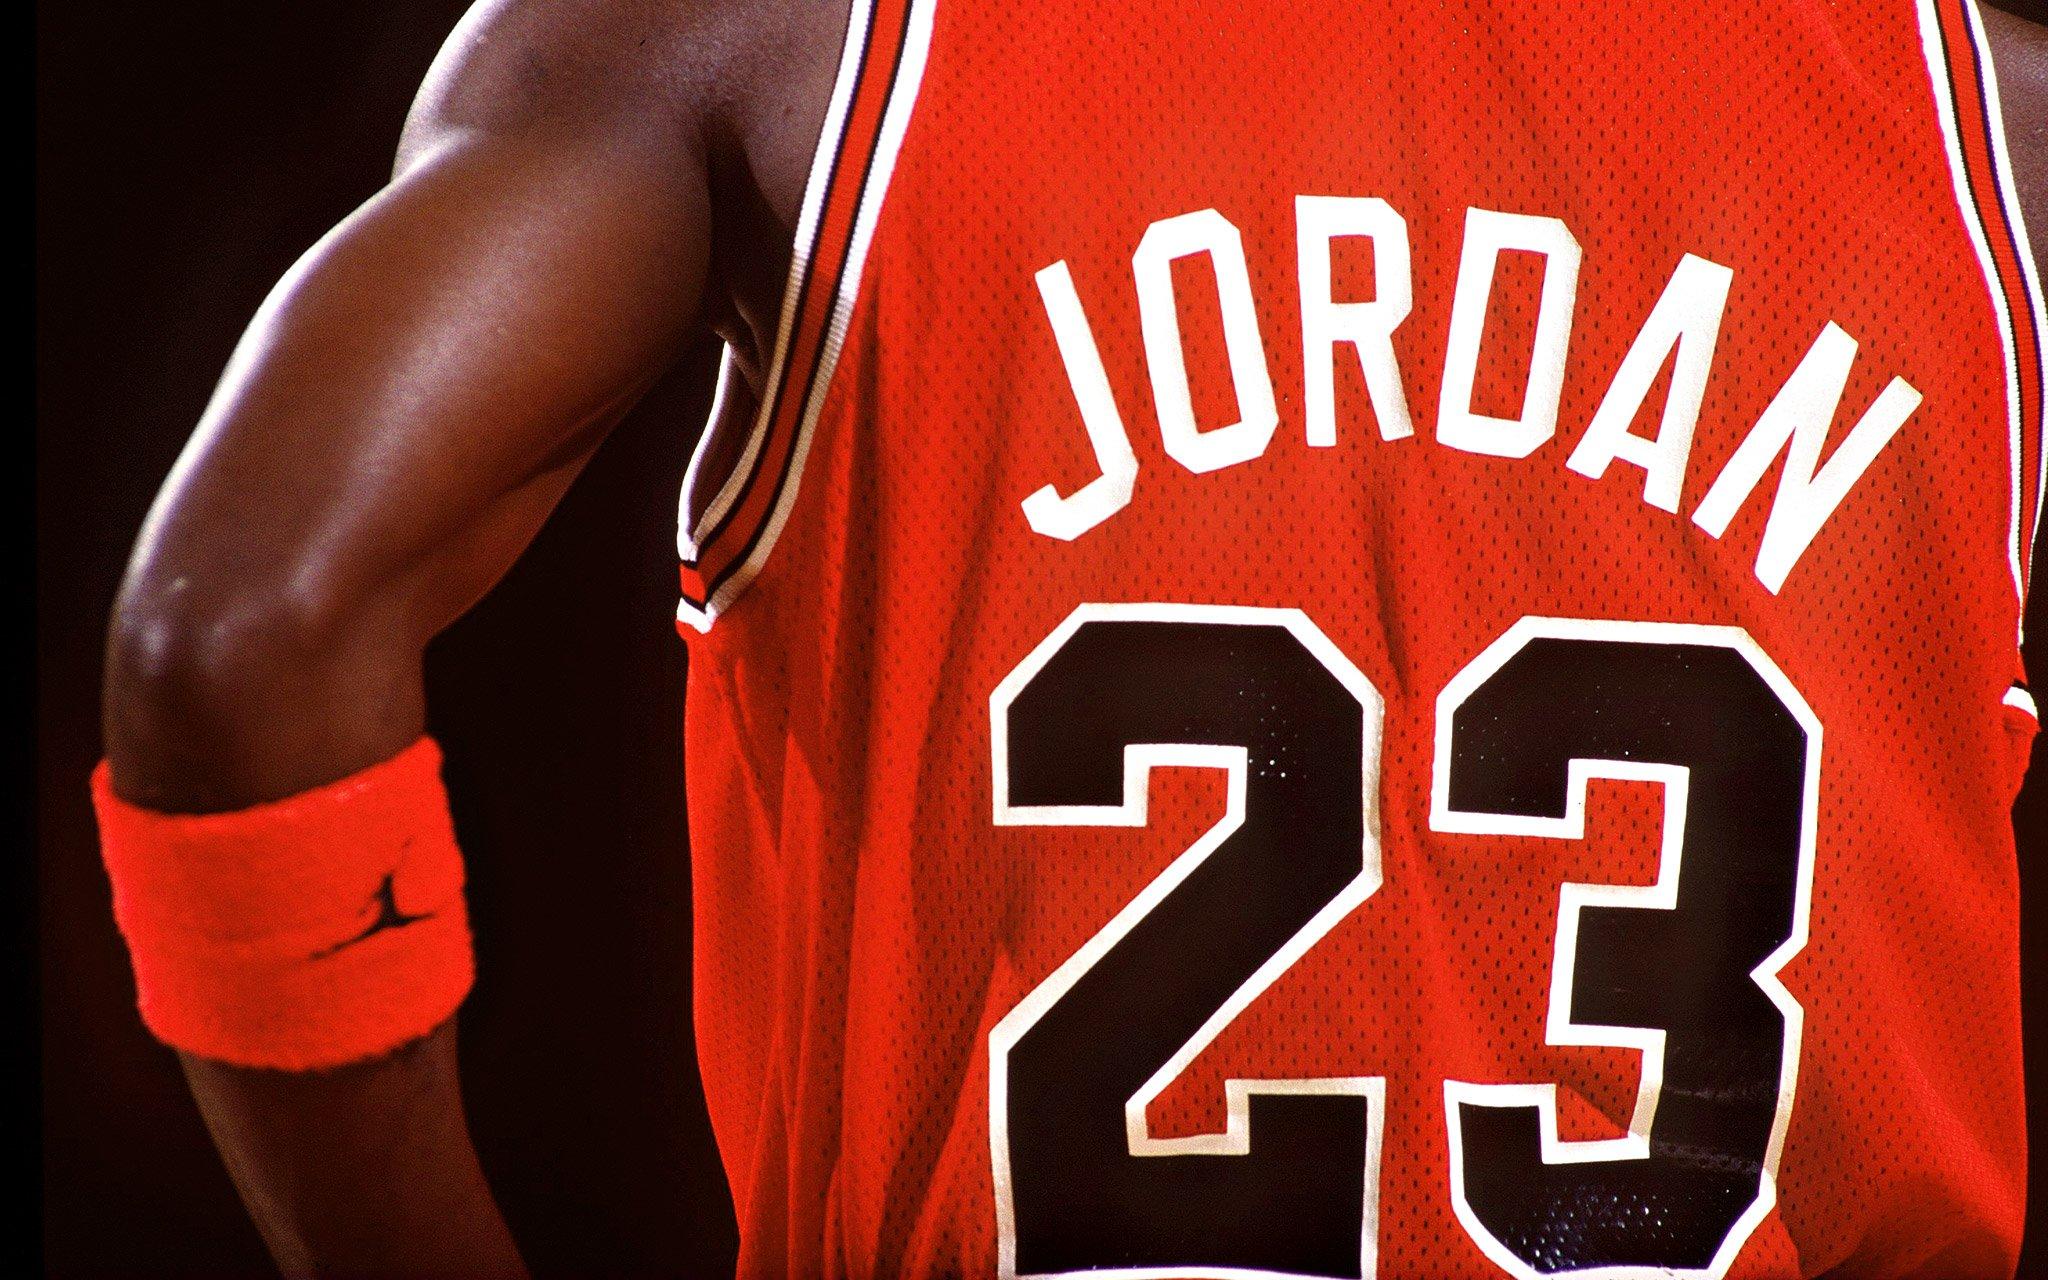 The back of a basketball player wearing a jersey that says Jordan on it. - Michael Jordan